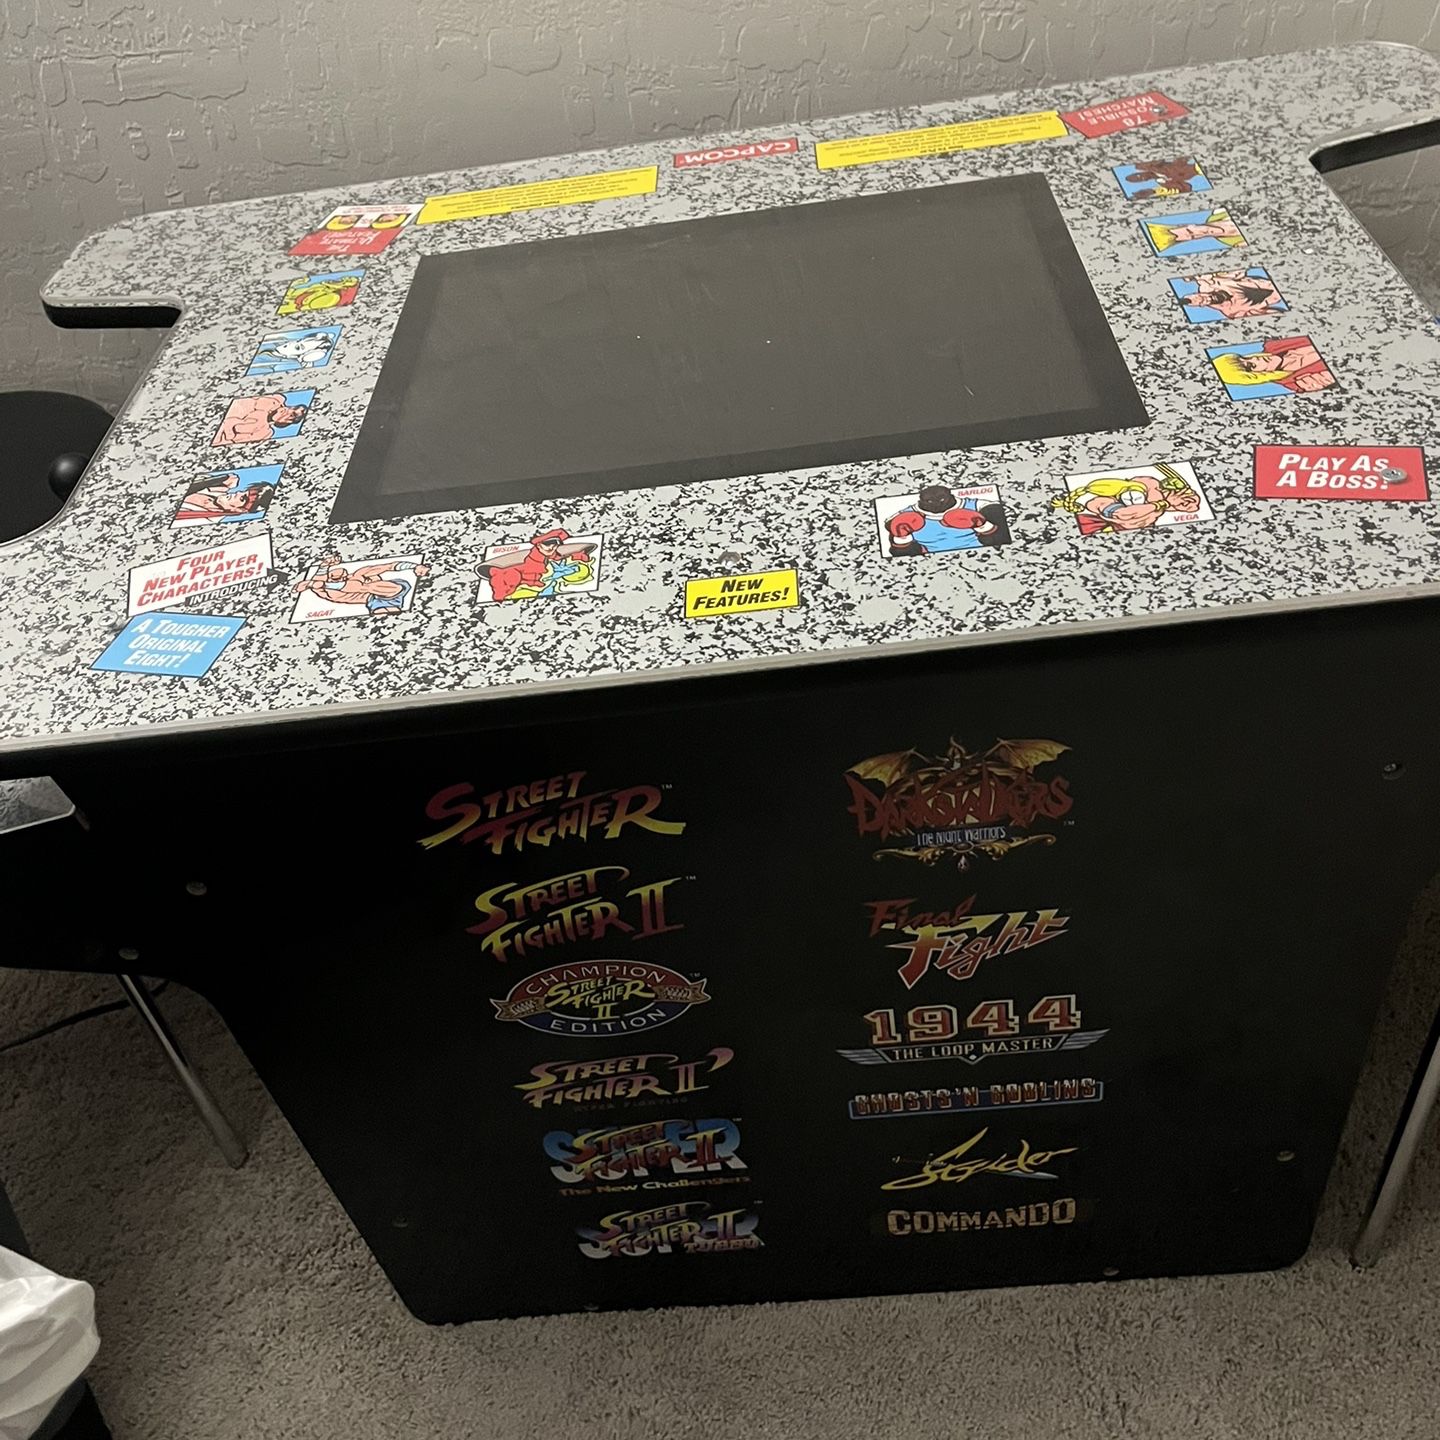 $300  - Arcade1UP - STREET FIGHTER - COCKTAIL TABLE ARCADE - 12 GAMES. 